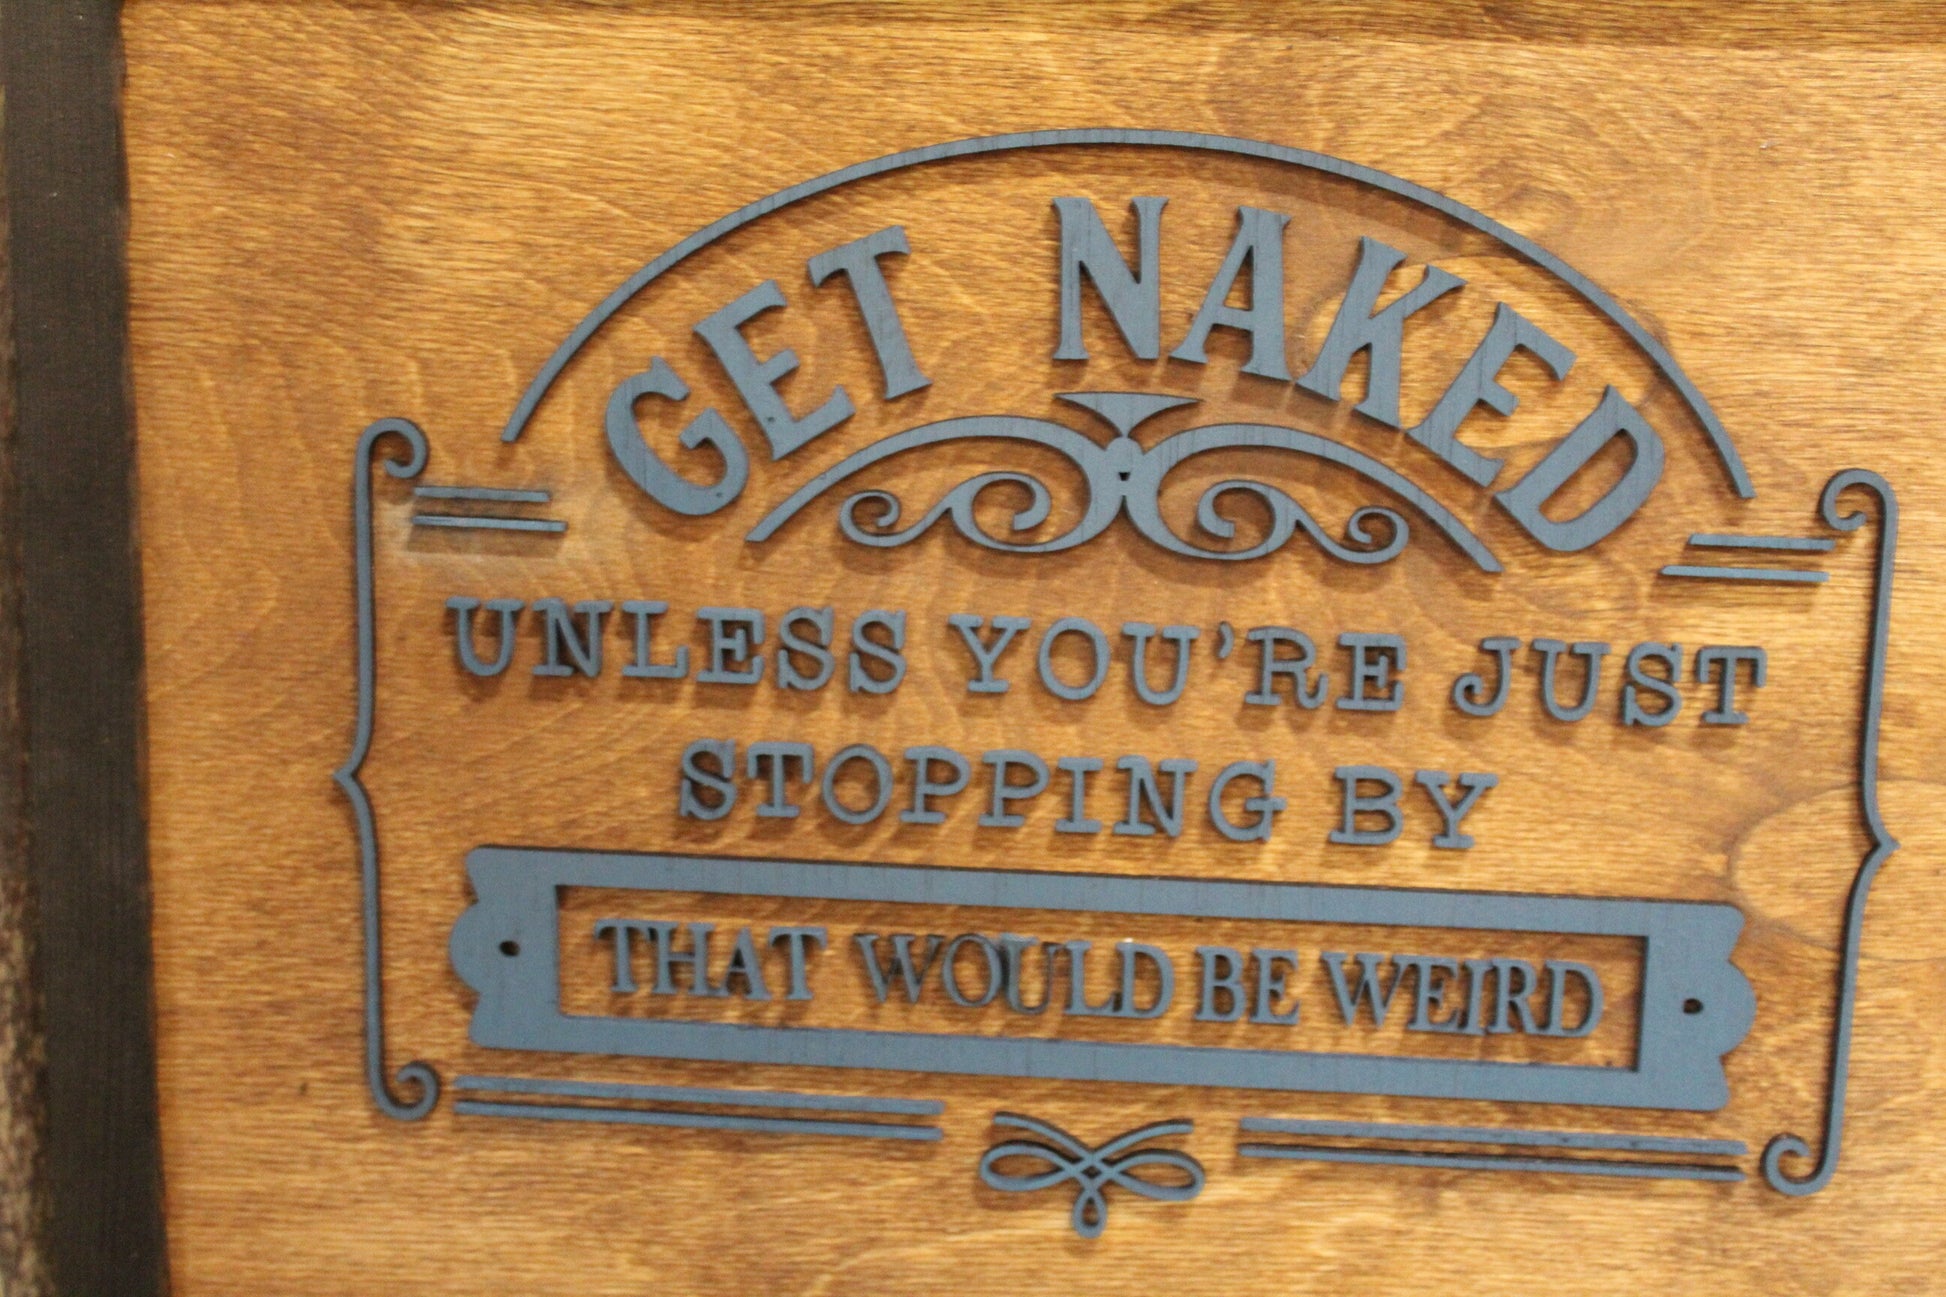 Get Naked Guest Sign Unless Your Just Stopping By That Would Be Weird Bathroom Guest Bath Half Wall Art 3D Raised Text Rustic Cabin Wood